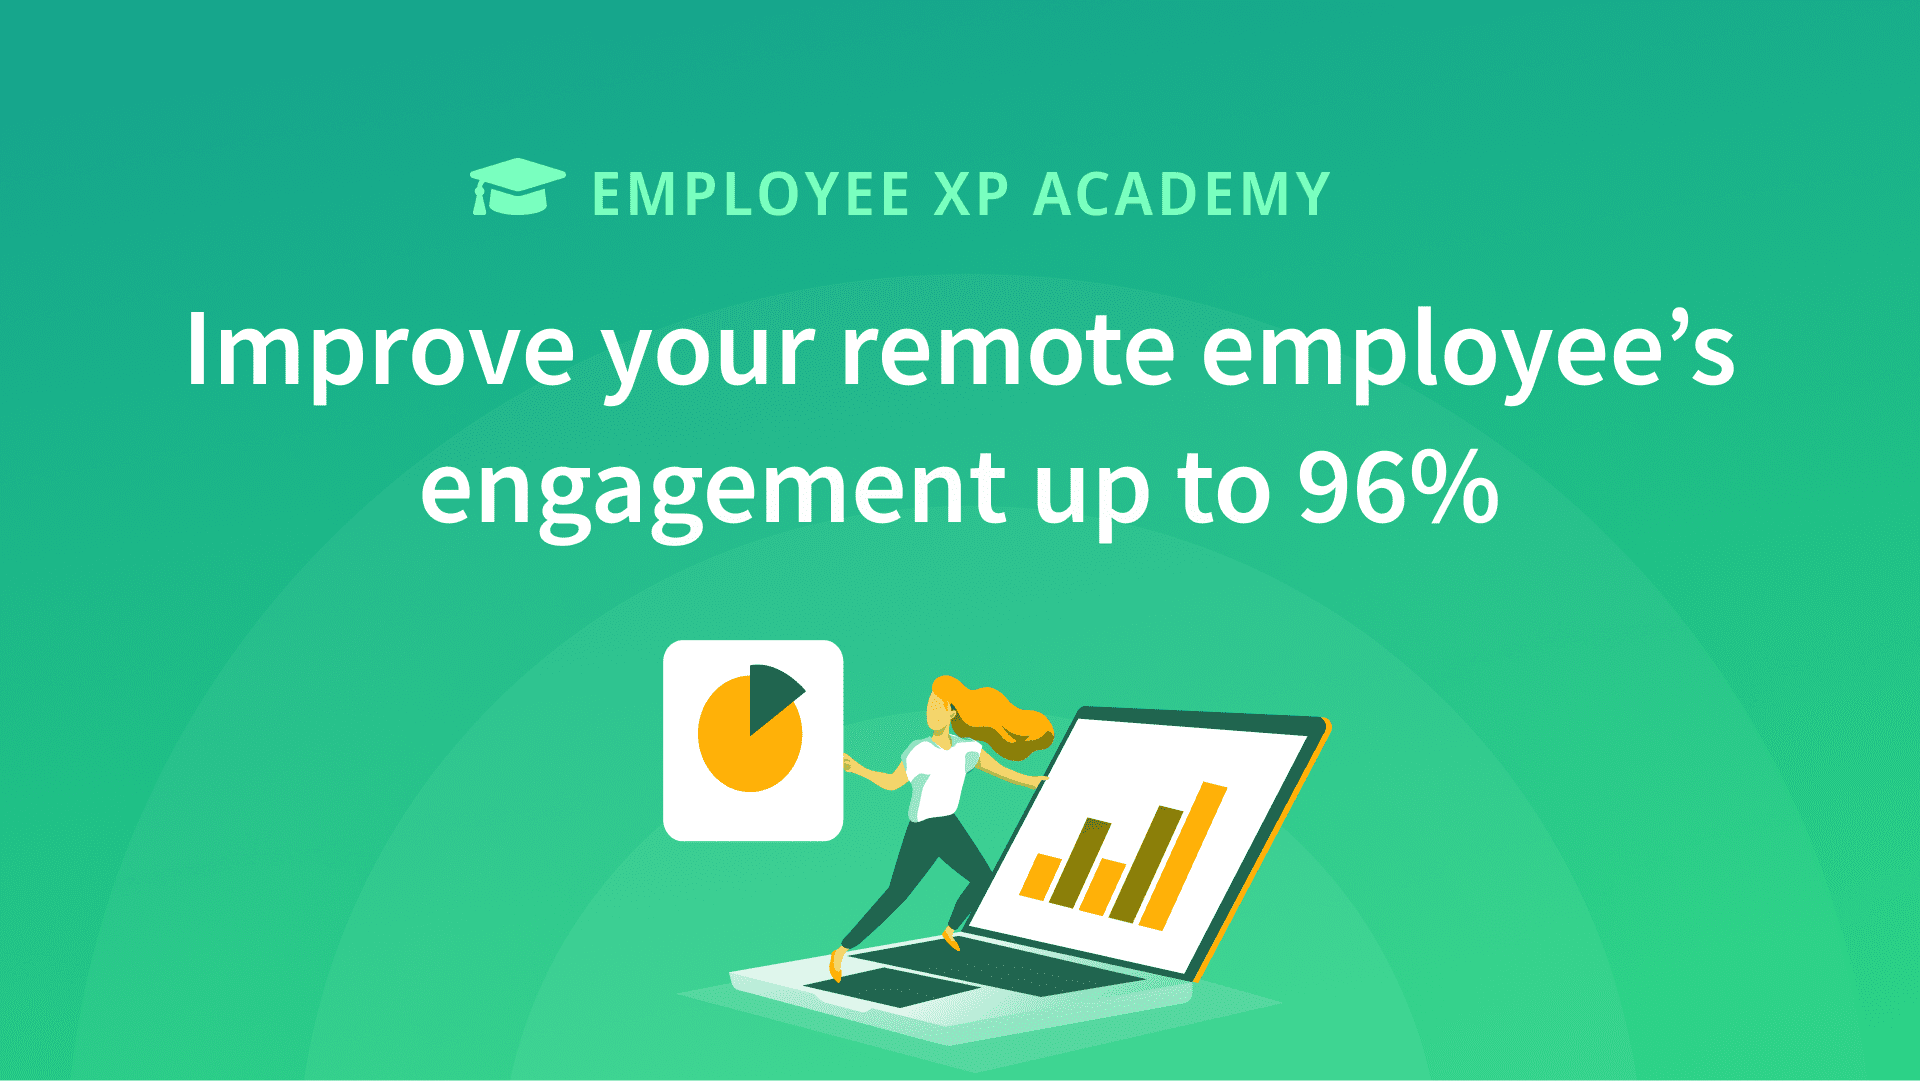 How to improve your remote employee's engagement up to 96%